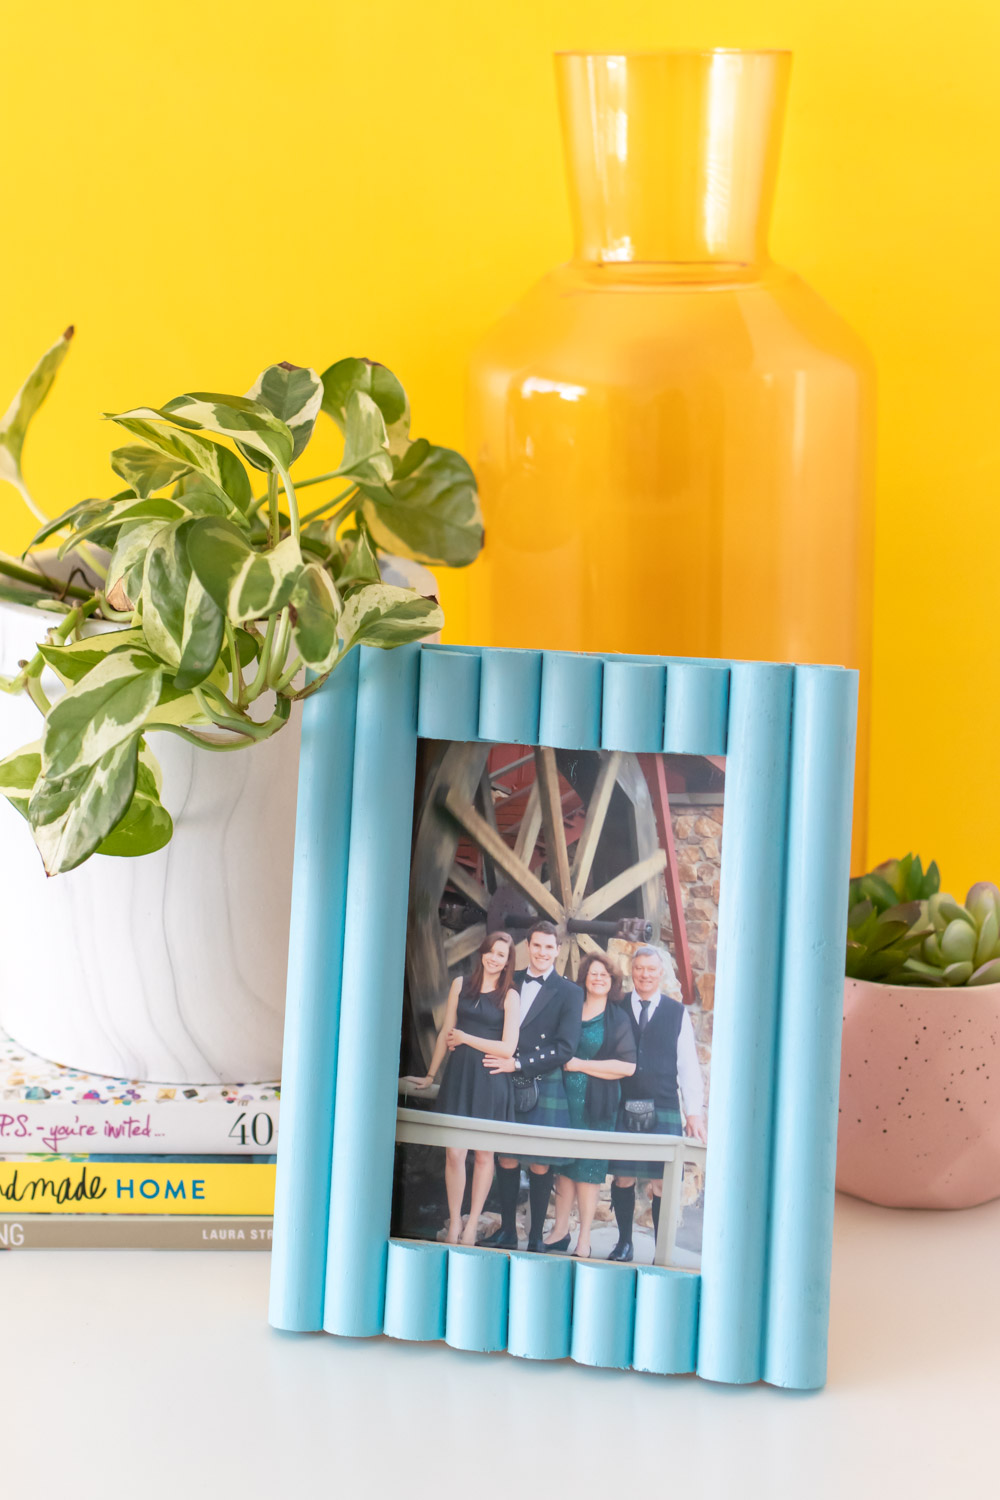 easy photo frame update with trim on table with plant